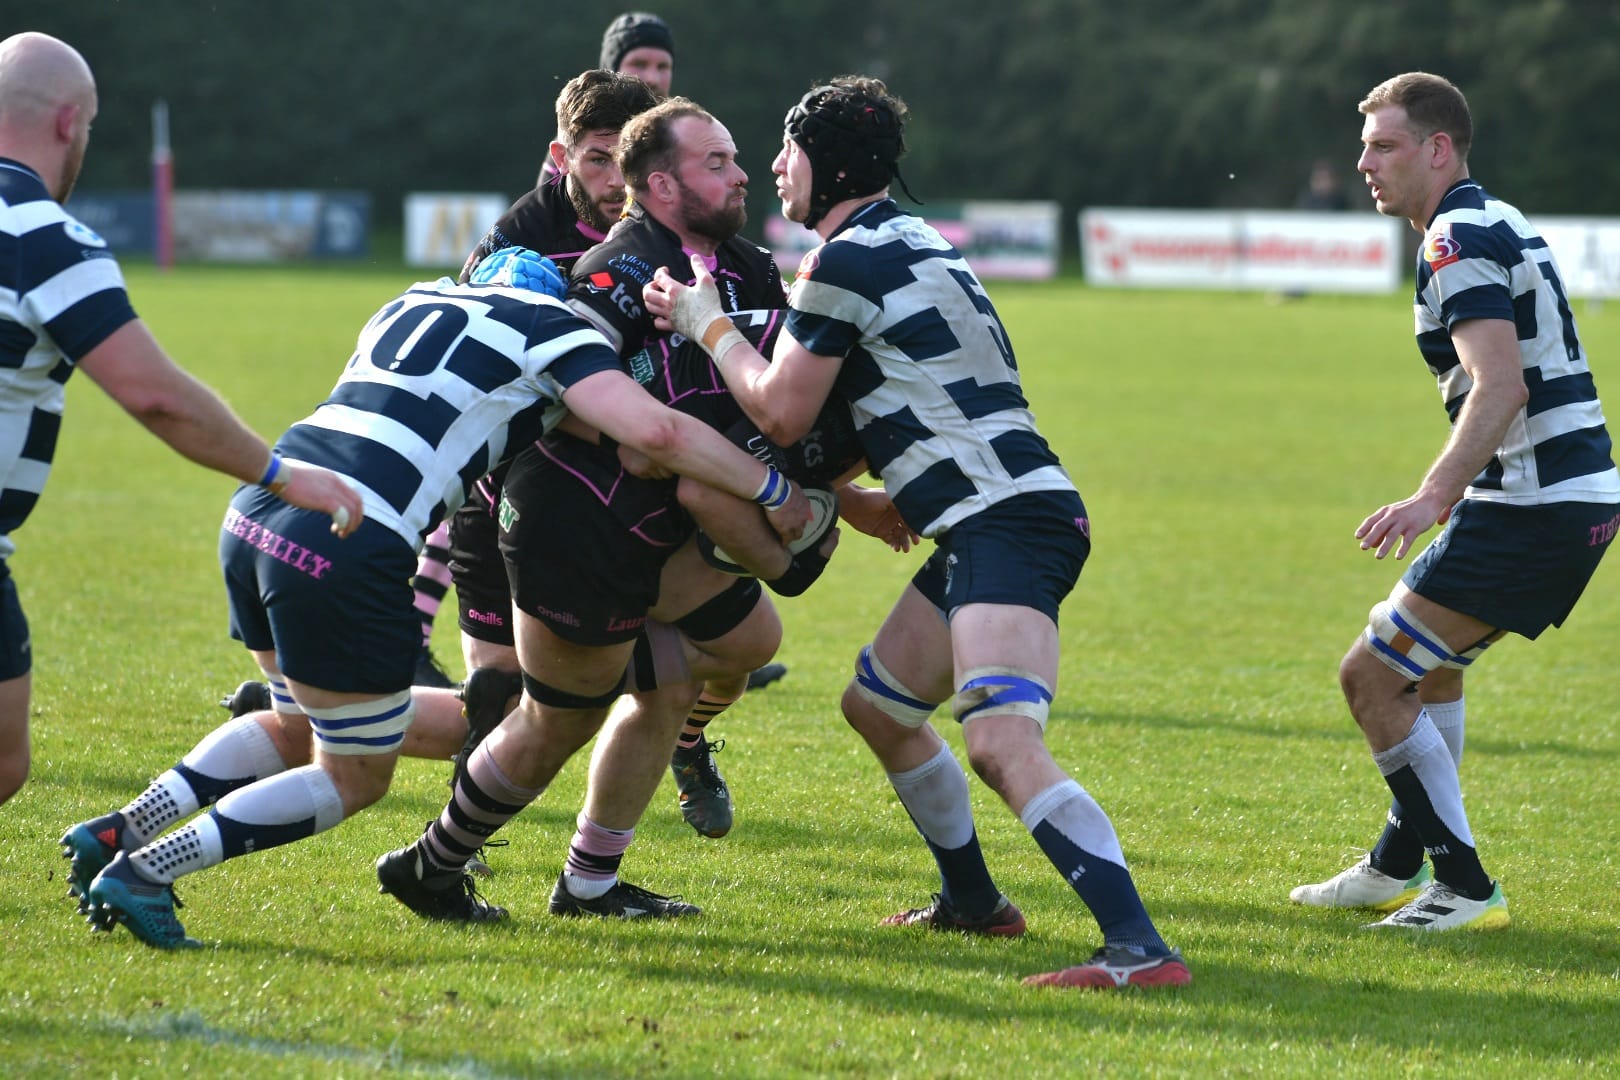 Bulls and Heriots split the points at Millbrae Ayrshire Bulls Rugby